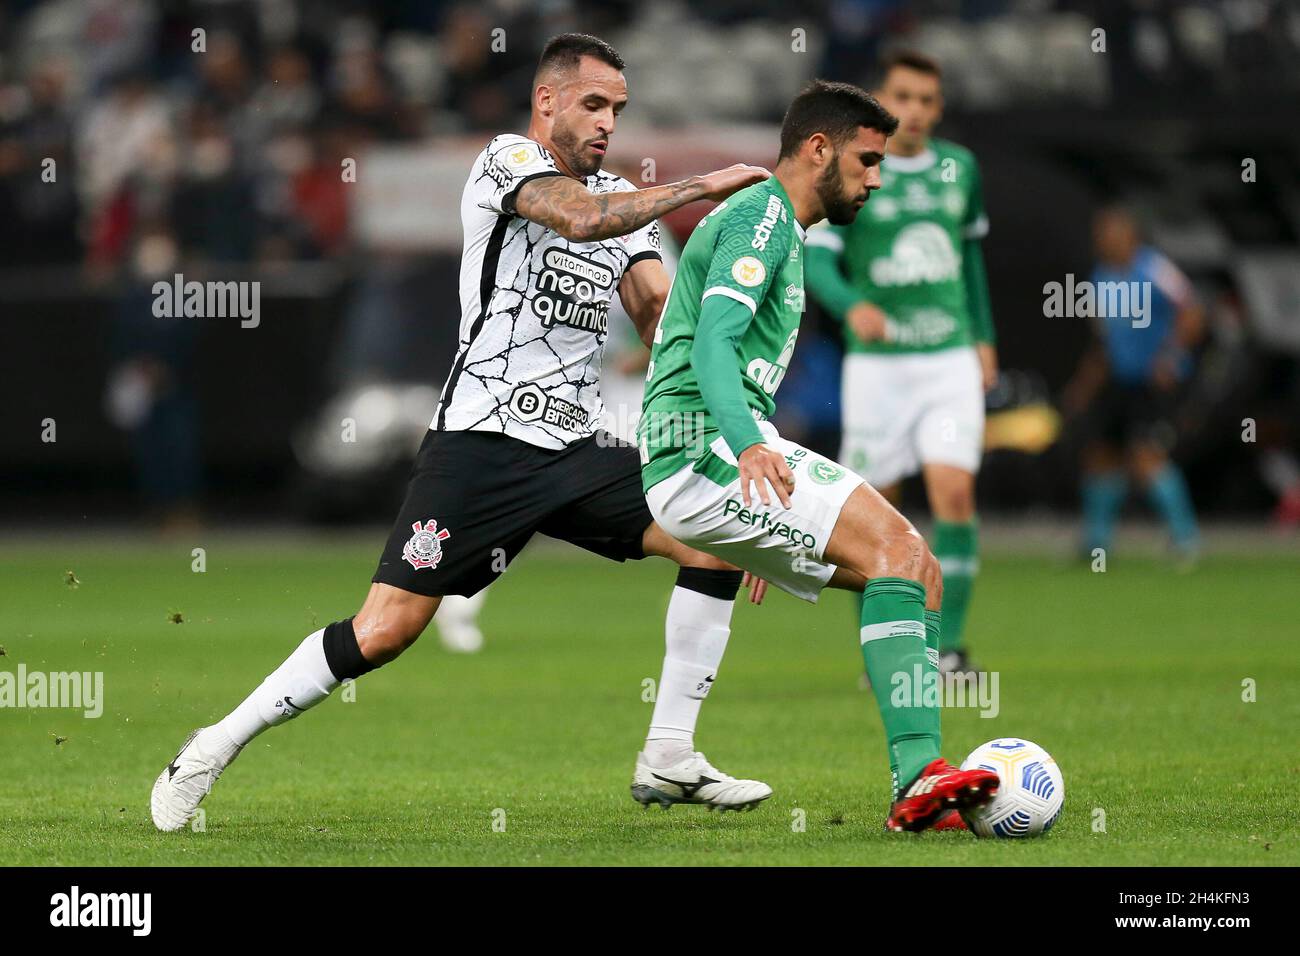 SÃO PAULO, SP - 01.11.2021: CORINTHIANS X CHAPECOENSE - Renato Augusto during the game between Corinthians and Chapecoense held at Neo Química Arena in São Paulo, SP. The match is valid for Round 29 of Brasileirão 2021. (Photo: Marco Galvão/Fotoarena) Stock Photo